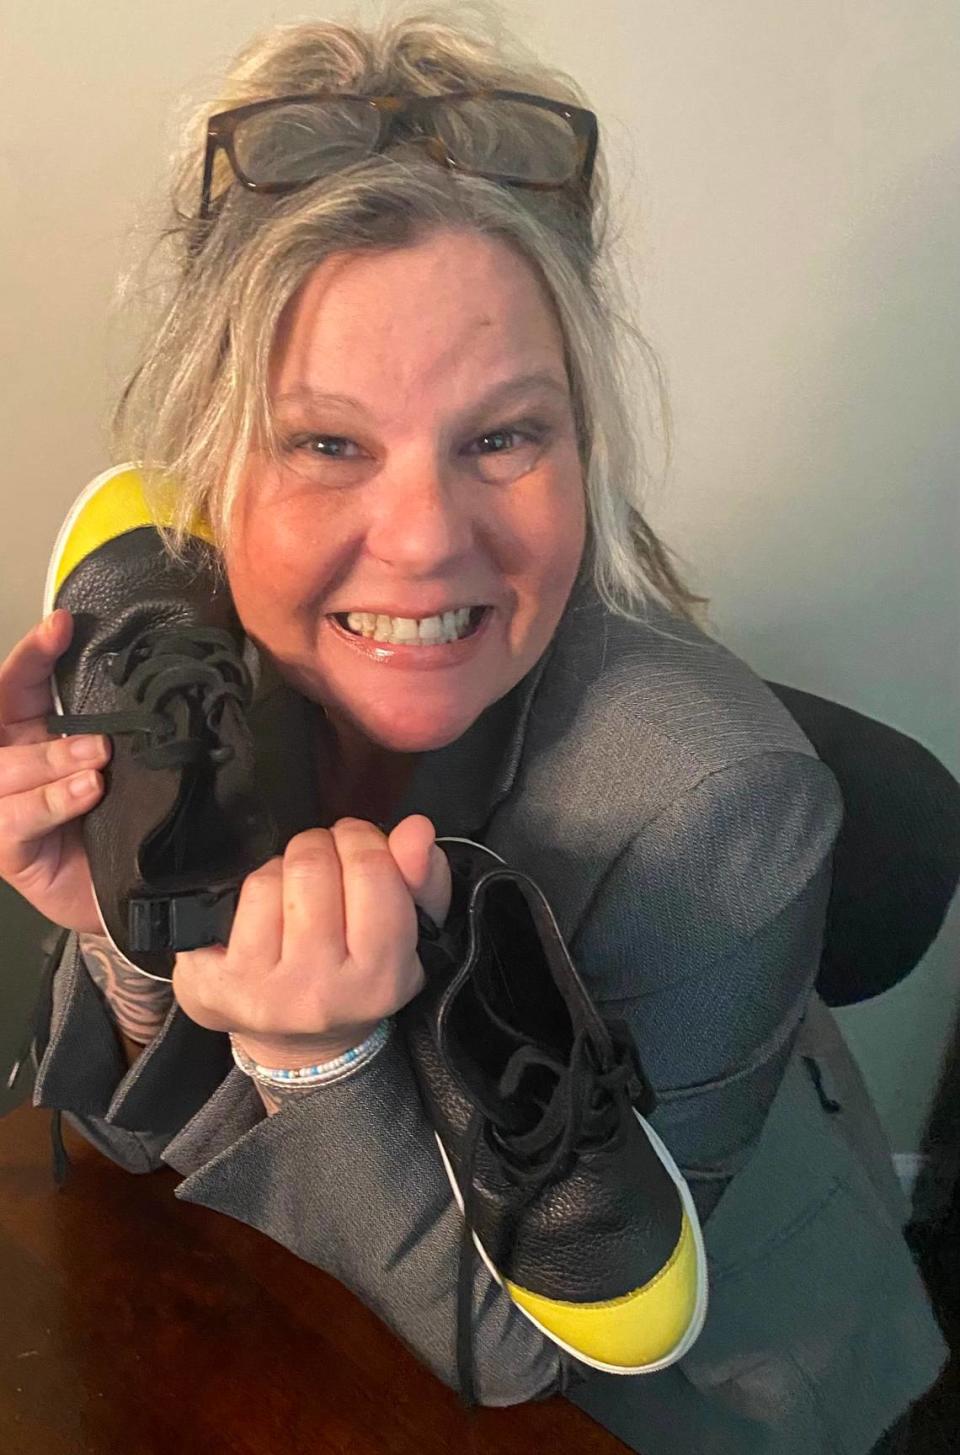 Sharyn Horewitch now lives outside Charlotte and has her own company — NYOS LLC, which stands for Not Your Ordinary Shoe. She’s posing with with a prototype of a new type of shoe she developed that can’t be easily removed.